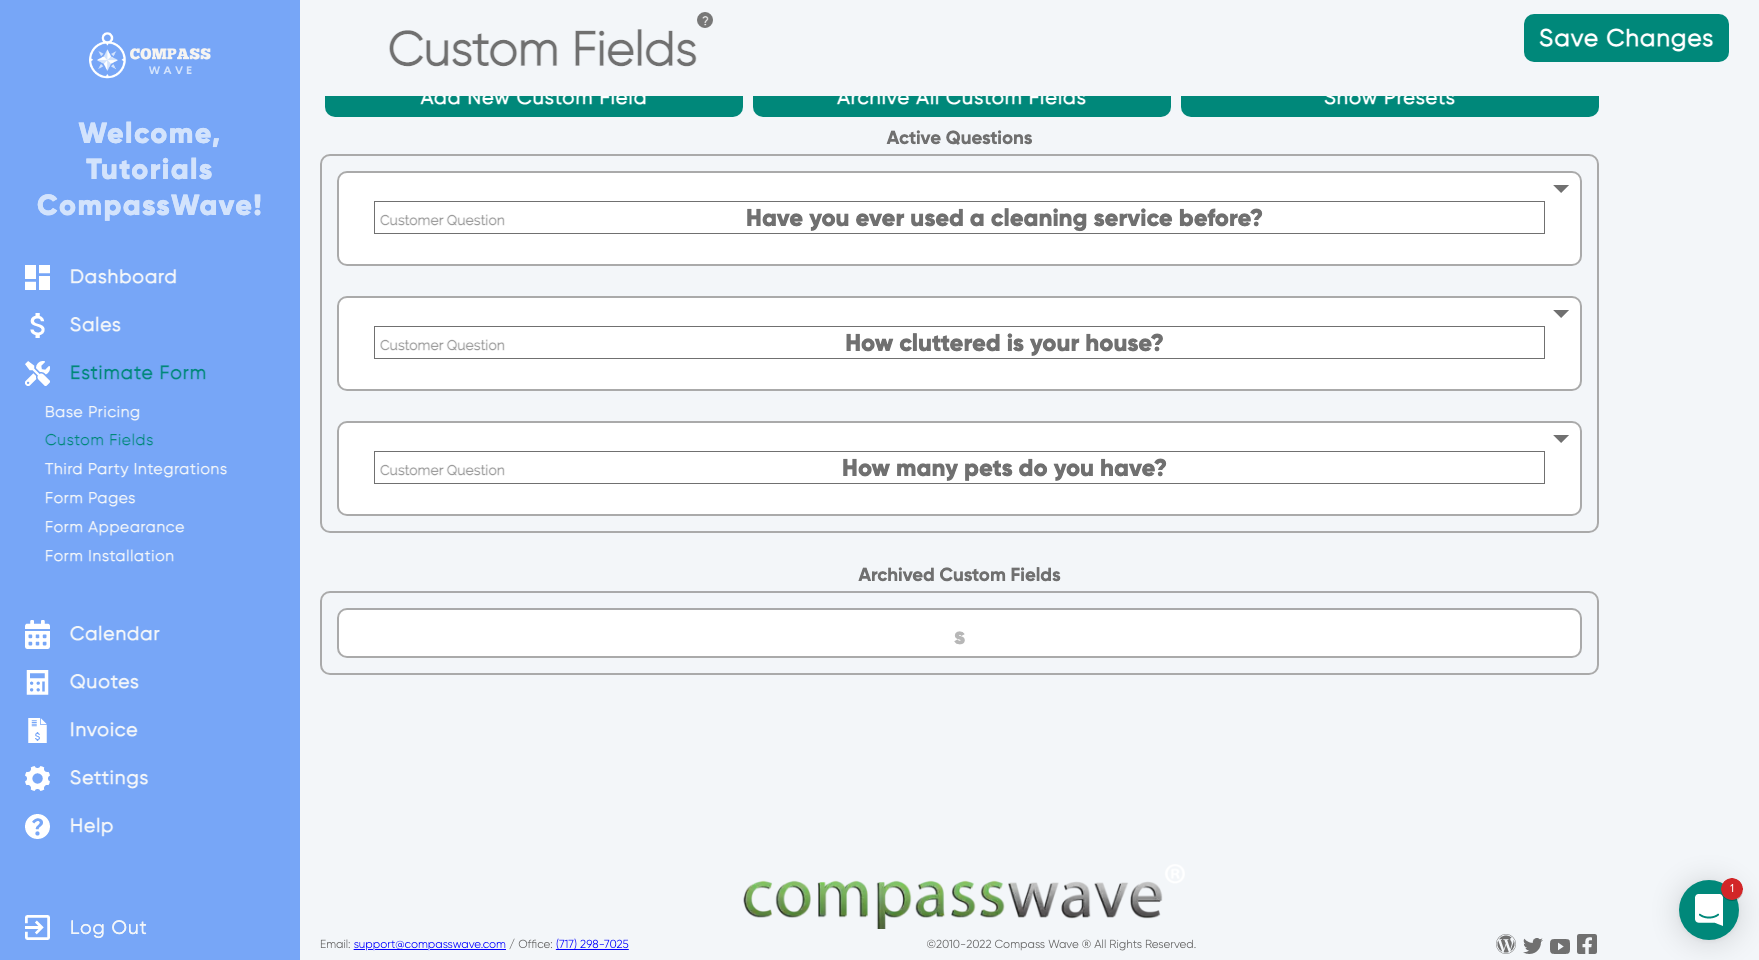 Custom Fields - This is where you will customize your questions and pricing to create collect and price information for estimates.